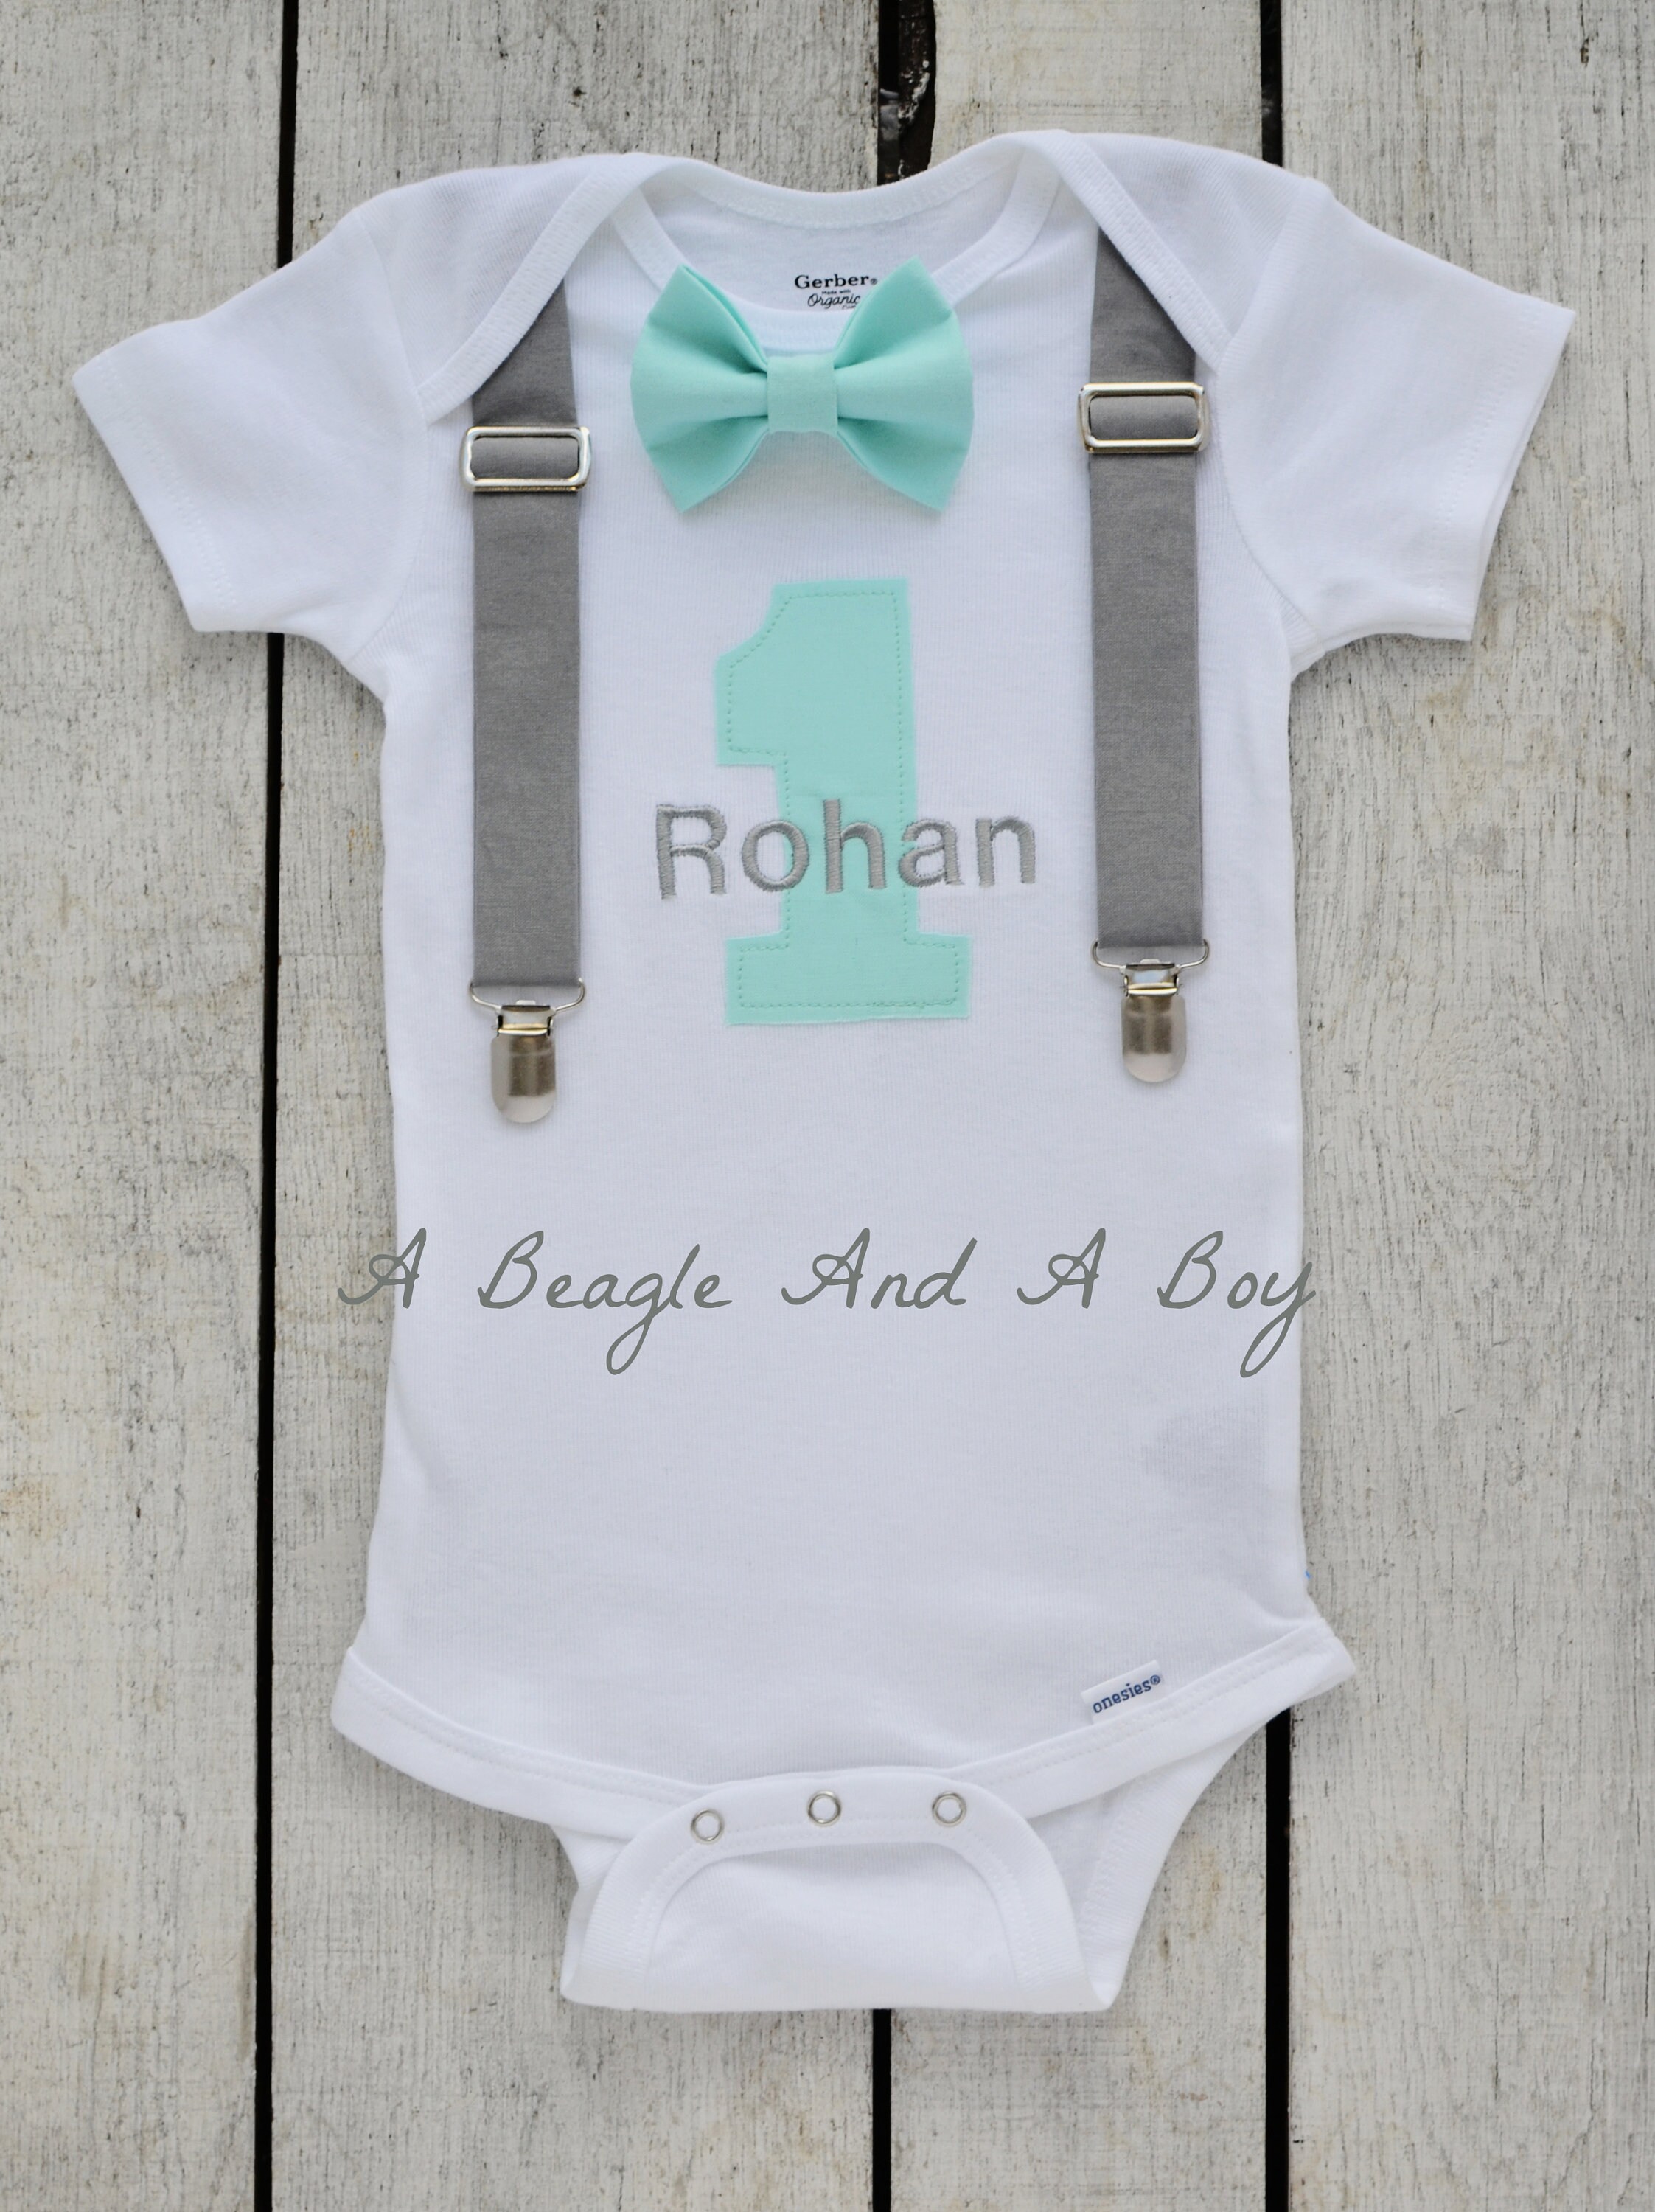 Boys First Birthday Outfit Baby Boy Clothes Gray Turquoise | Etsy